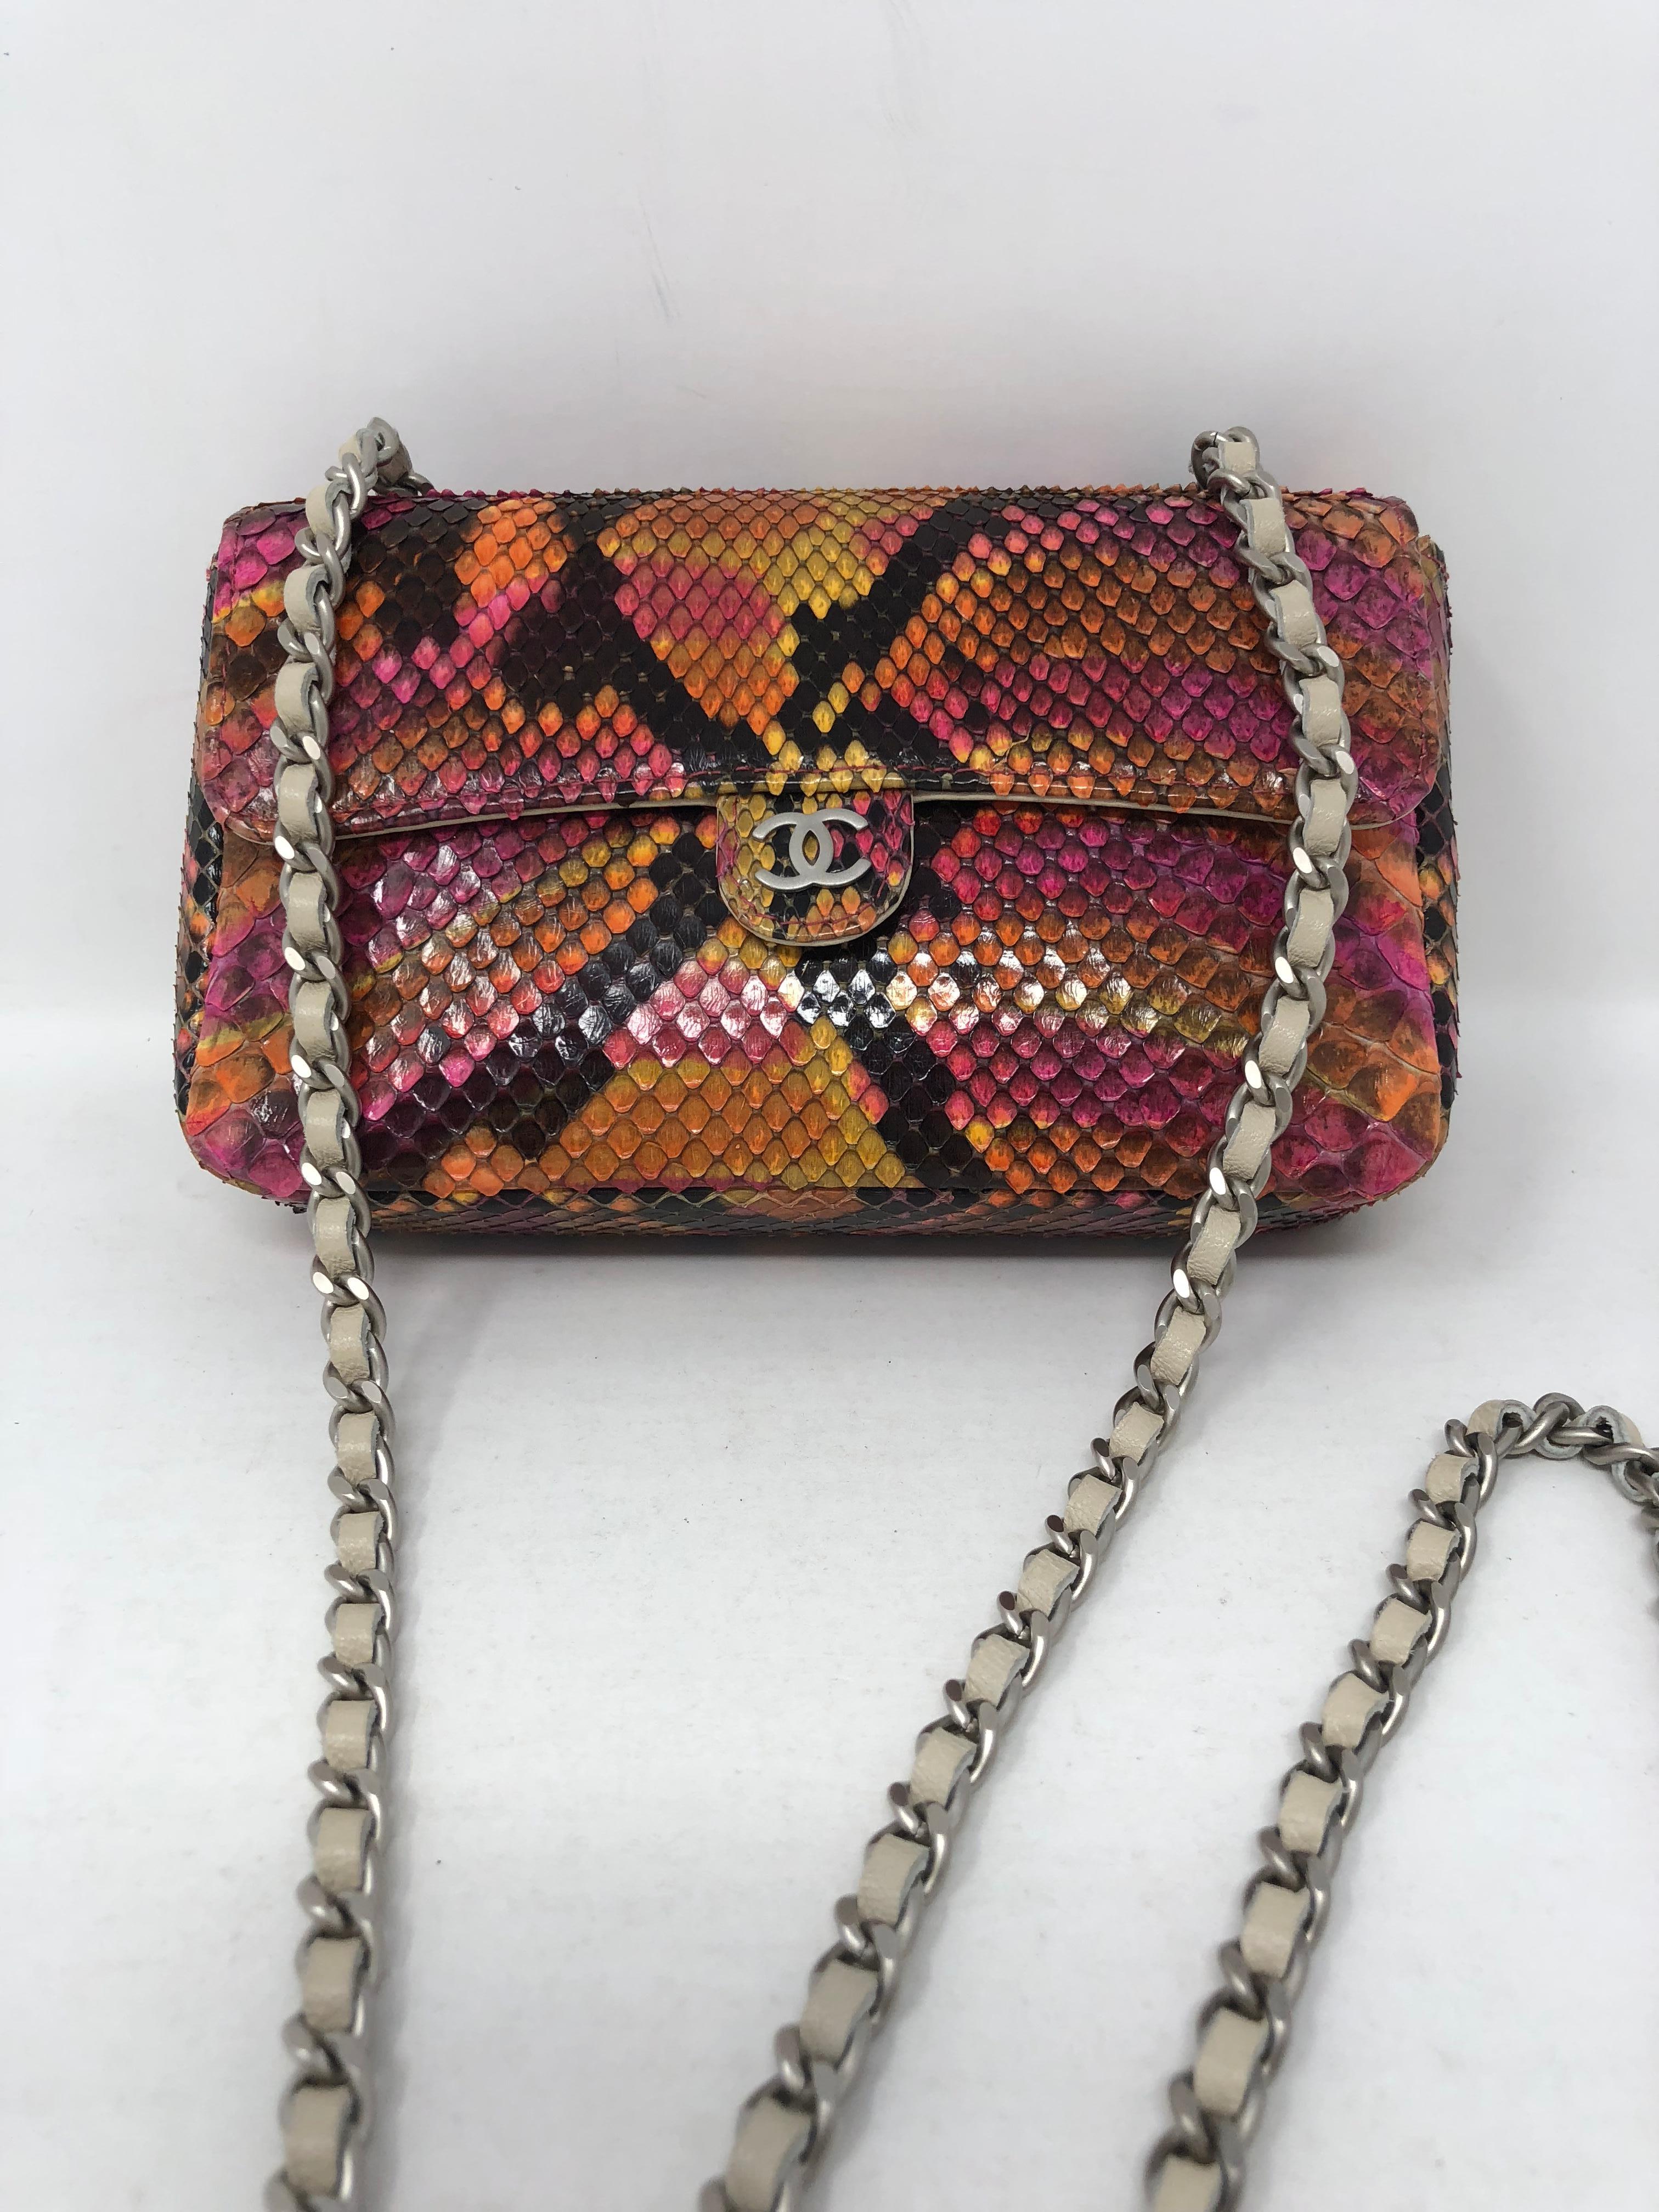 Chanel Python Mini Evening Bag in pink ,orange, yellow and black. Mint condition like new. All leather interior with white leather chain links. No wear on the python. Unique pattern and design python mini. Silver hardware. Can be worn as a